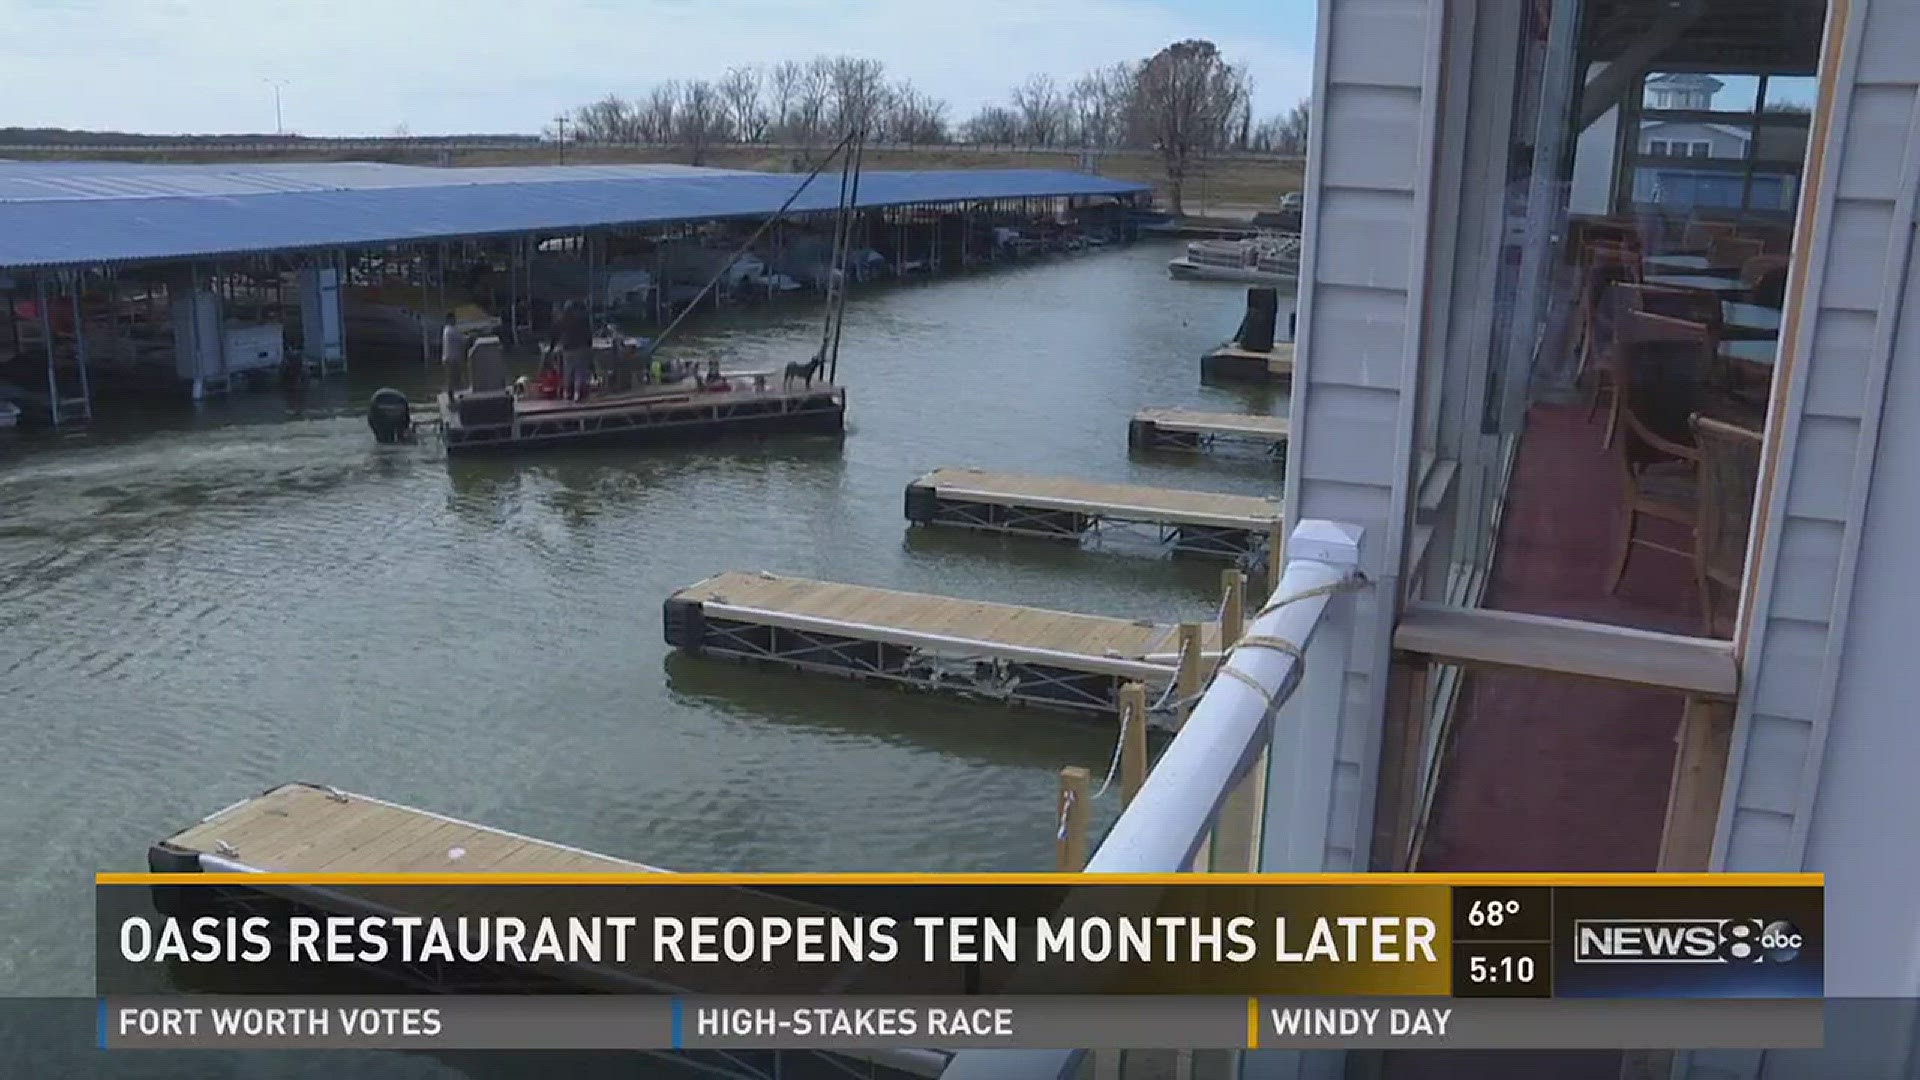 The Oasis restaurant closed last May after historic flooding in North Texas. It finally reopened Tuesday. Bradley Blackburn has more.